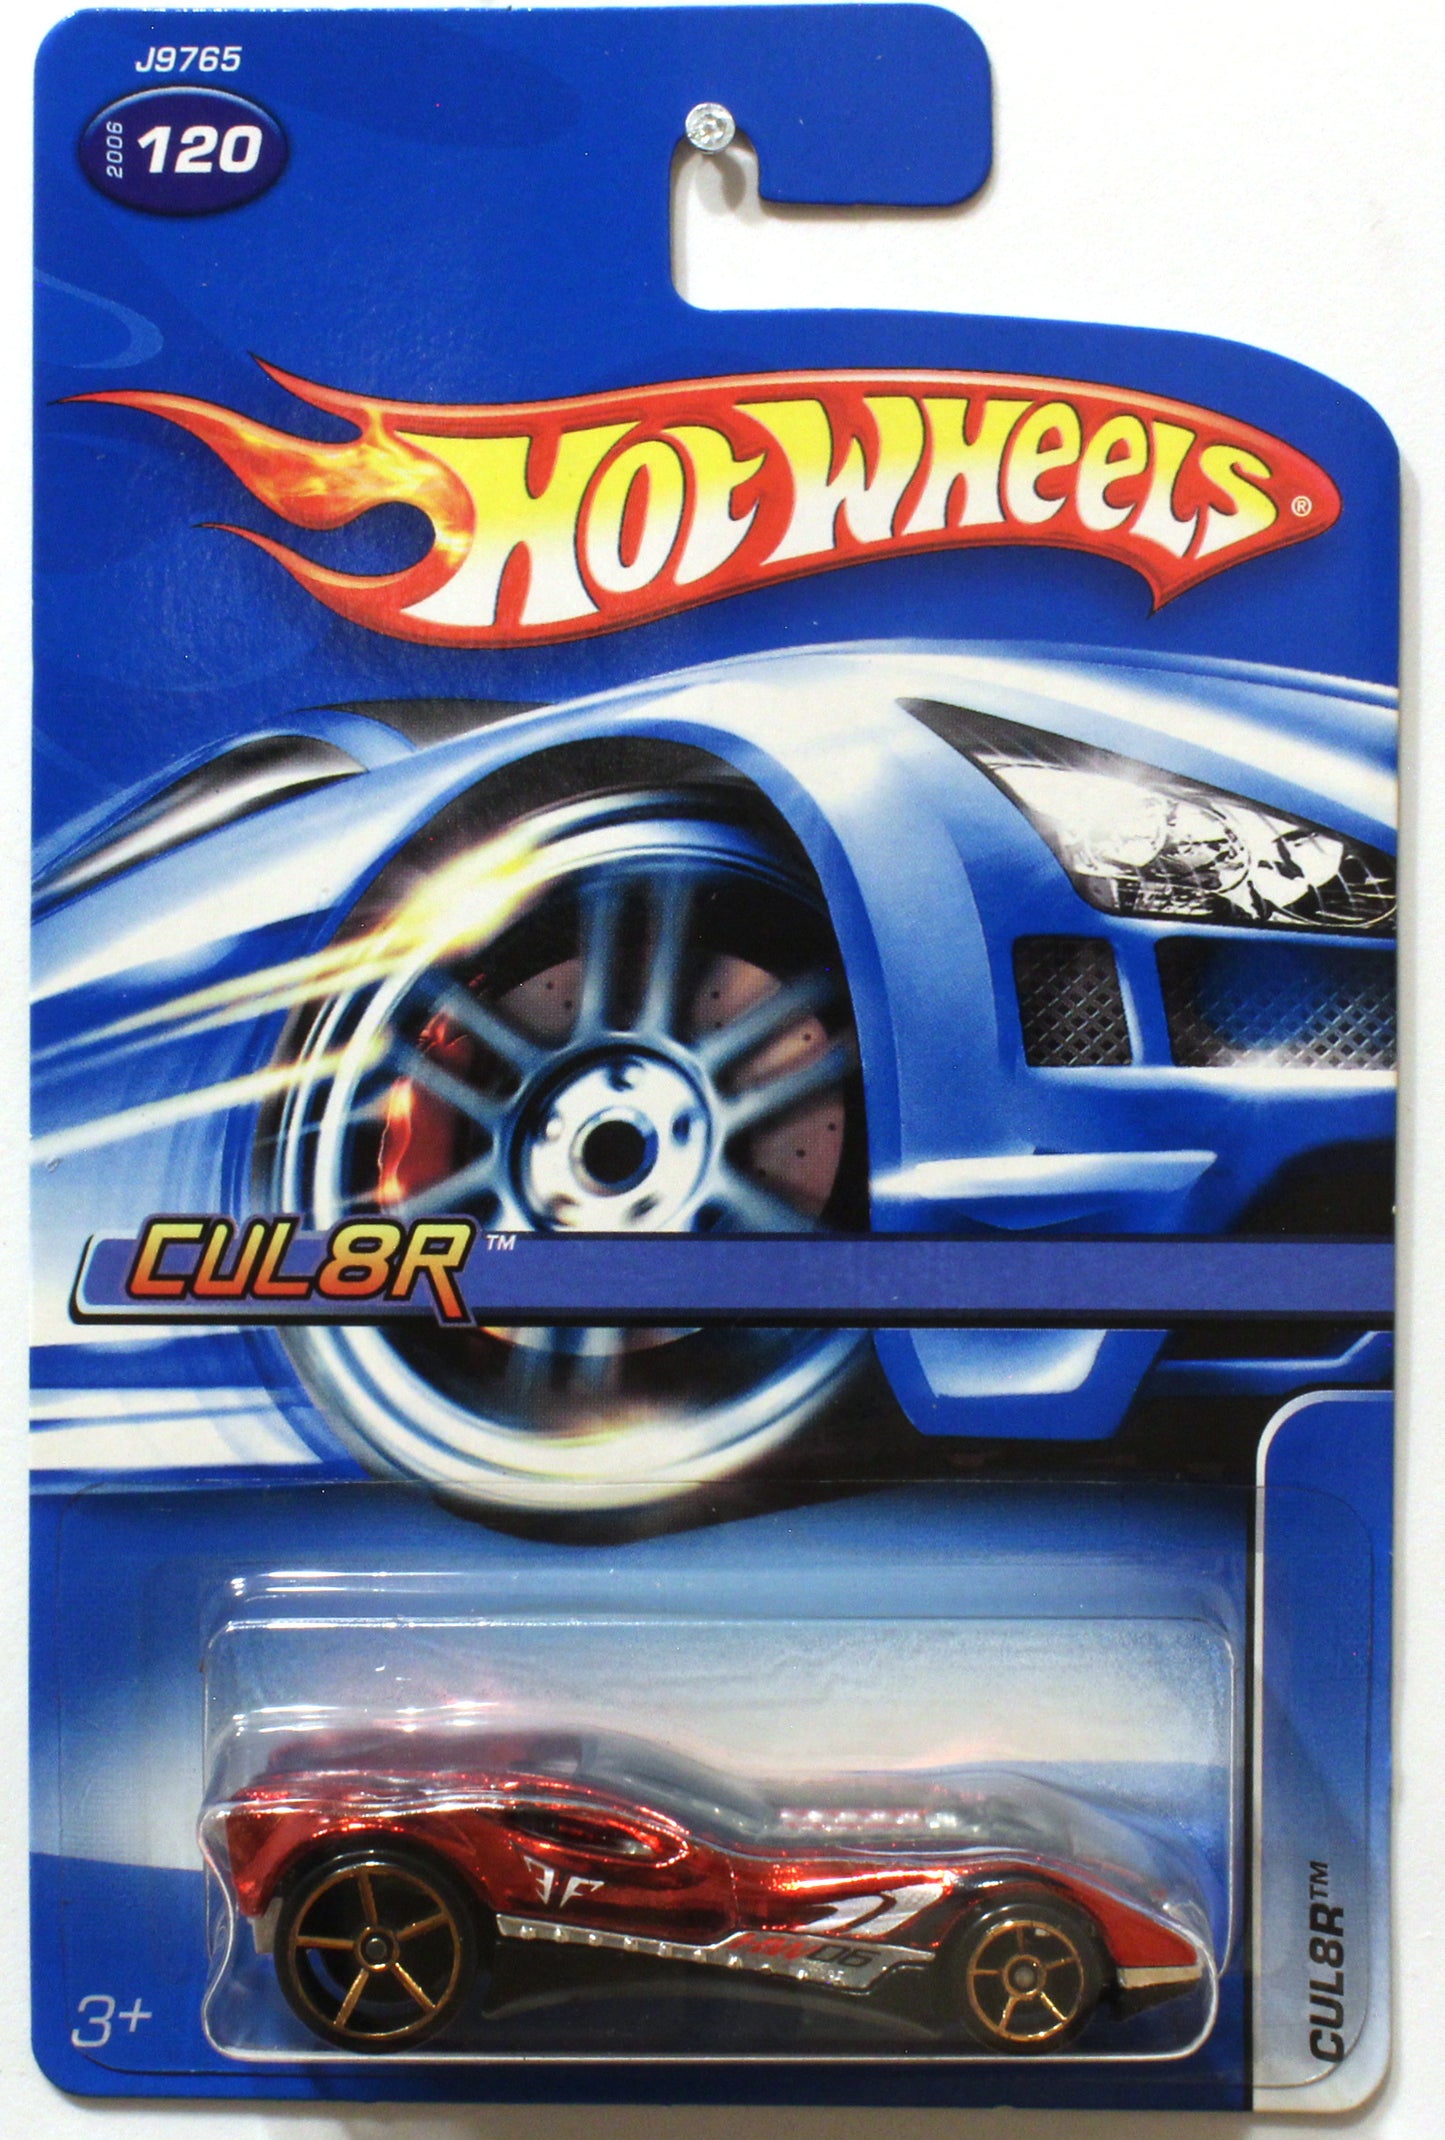 Hot Wheels 2006 - Collector # 120/223 - Mail-In Promo / Track Aces 10/12 - CUL8R - Spectraflame / Chrome Red - Faster Than Ever Wheels